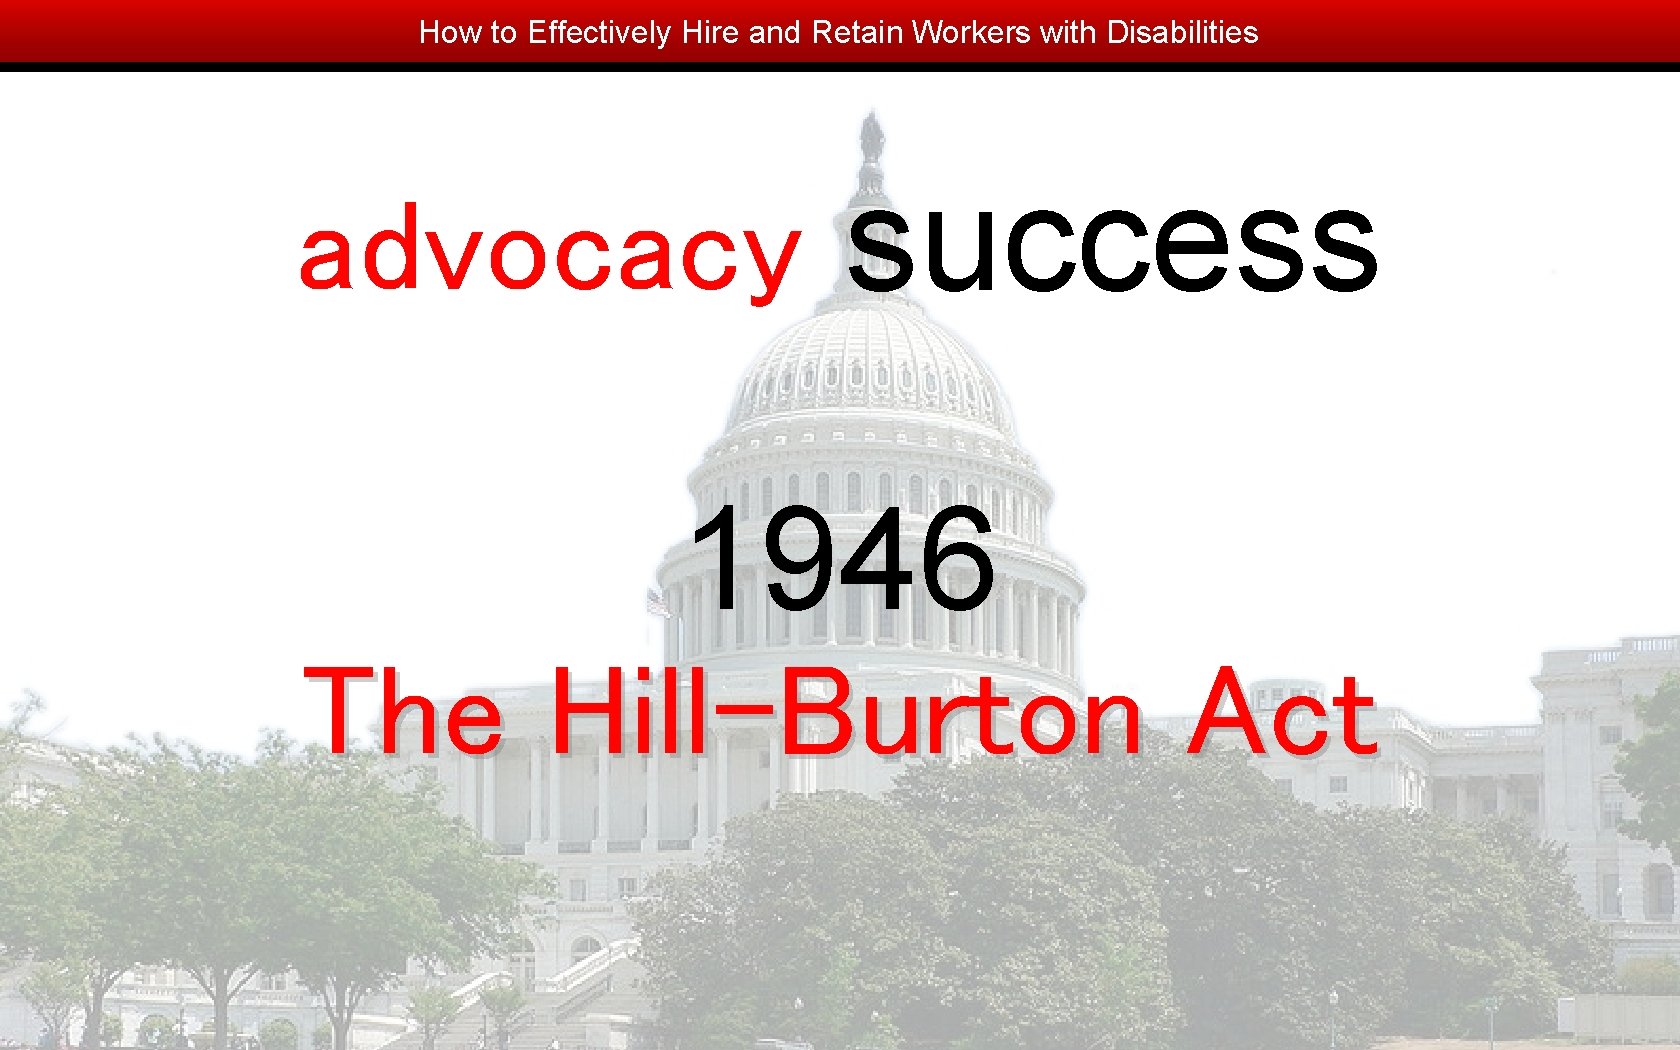 How to Effectively Hire and Retain Workers with Disabilities advocacy success 1946 The Hill-Burton